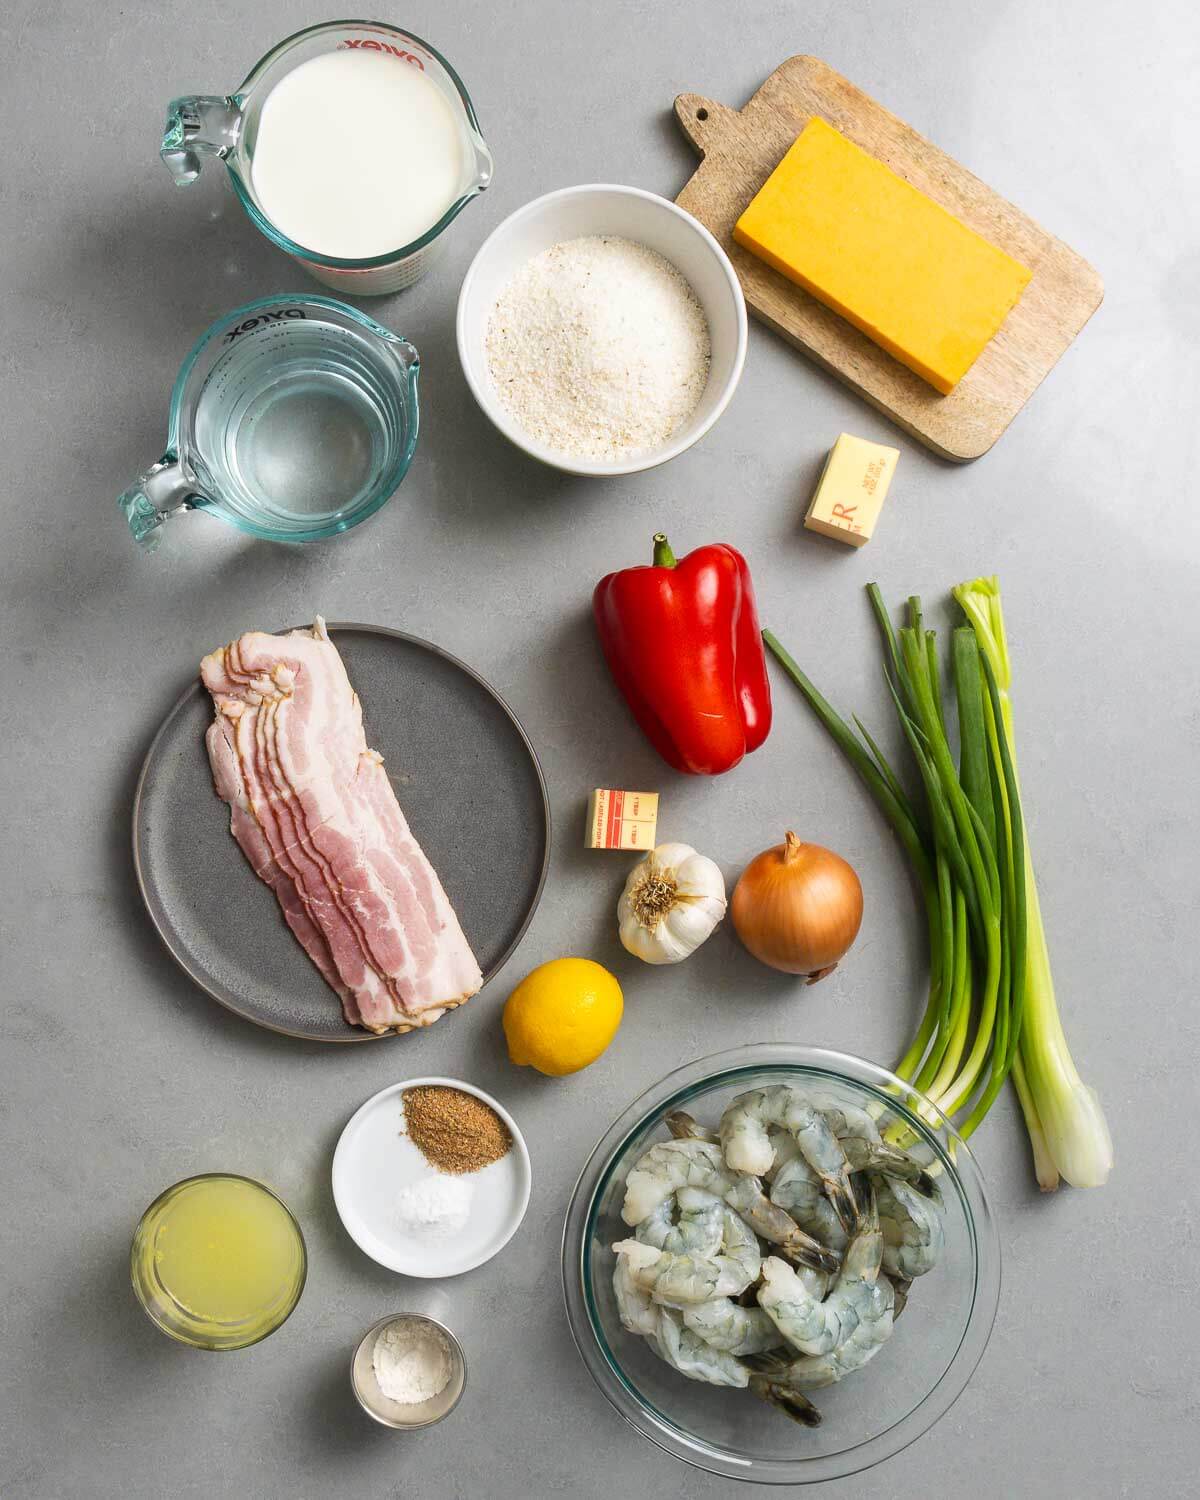 Ingredients shown: milk, water, grits, cheddar cheese, butter, bacon, bell pepper, garlic, onion, green onions, celery, chicken stock, spices, lemon, and shrimp.